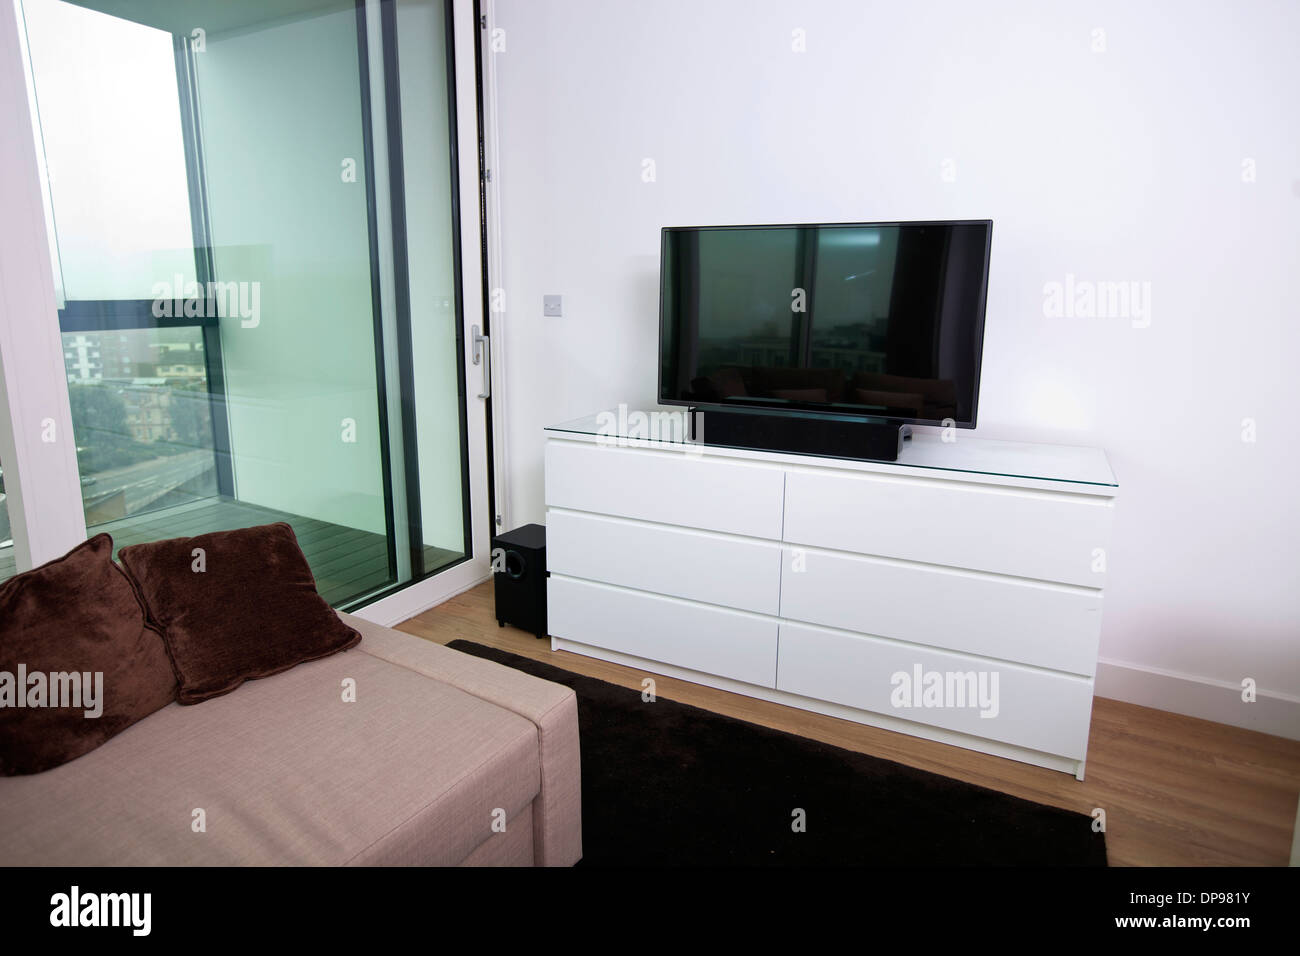 Interior of apartment with flat screen television Stock Photo